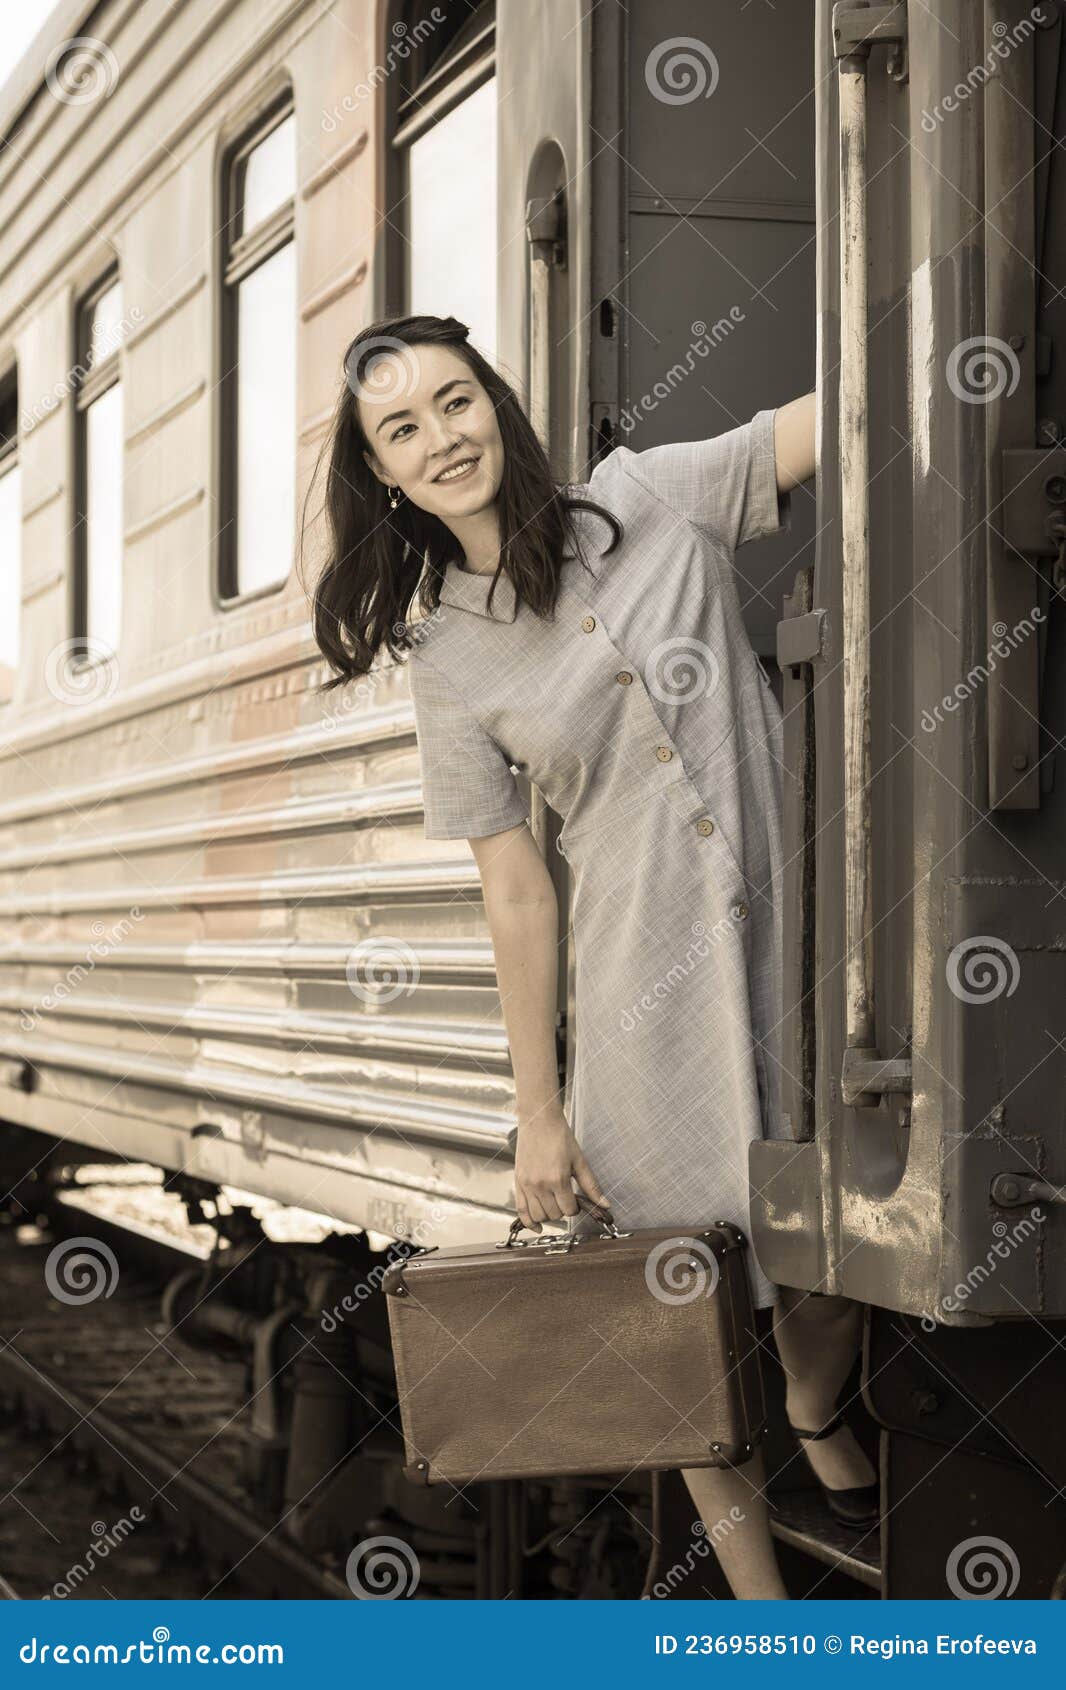 cale lambert recommends pulling a train on her pic